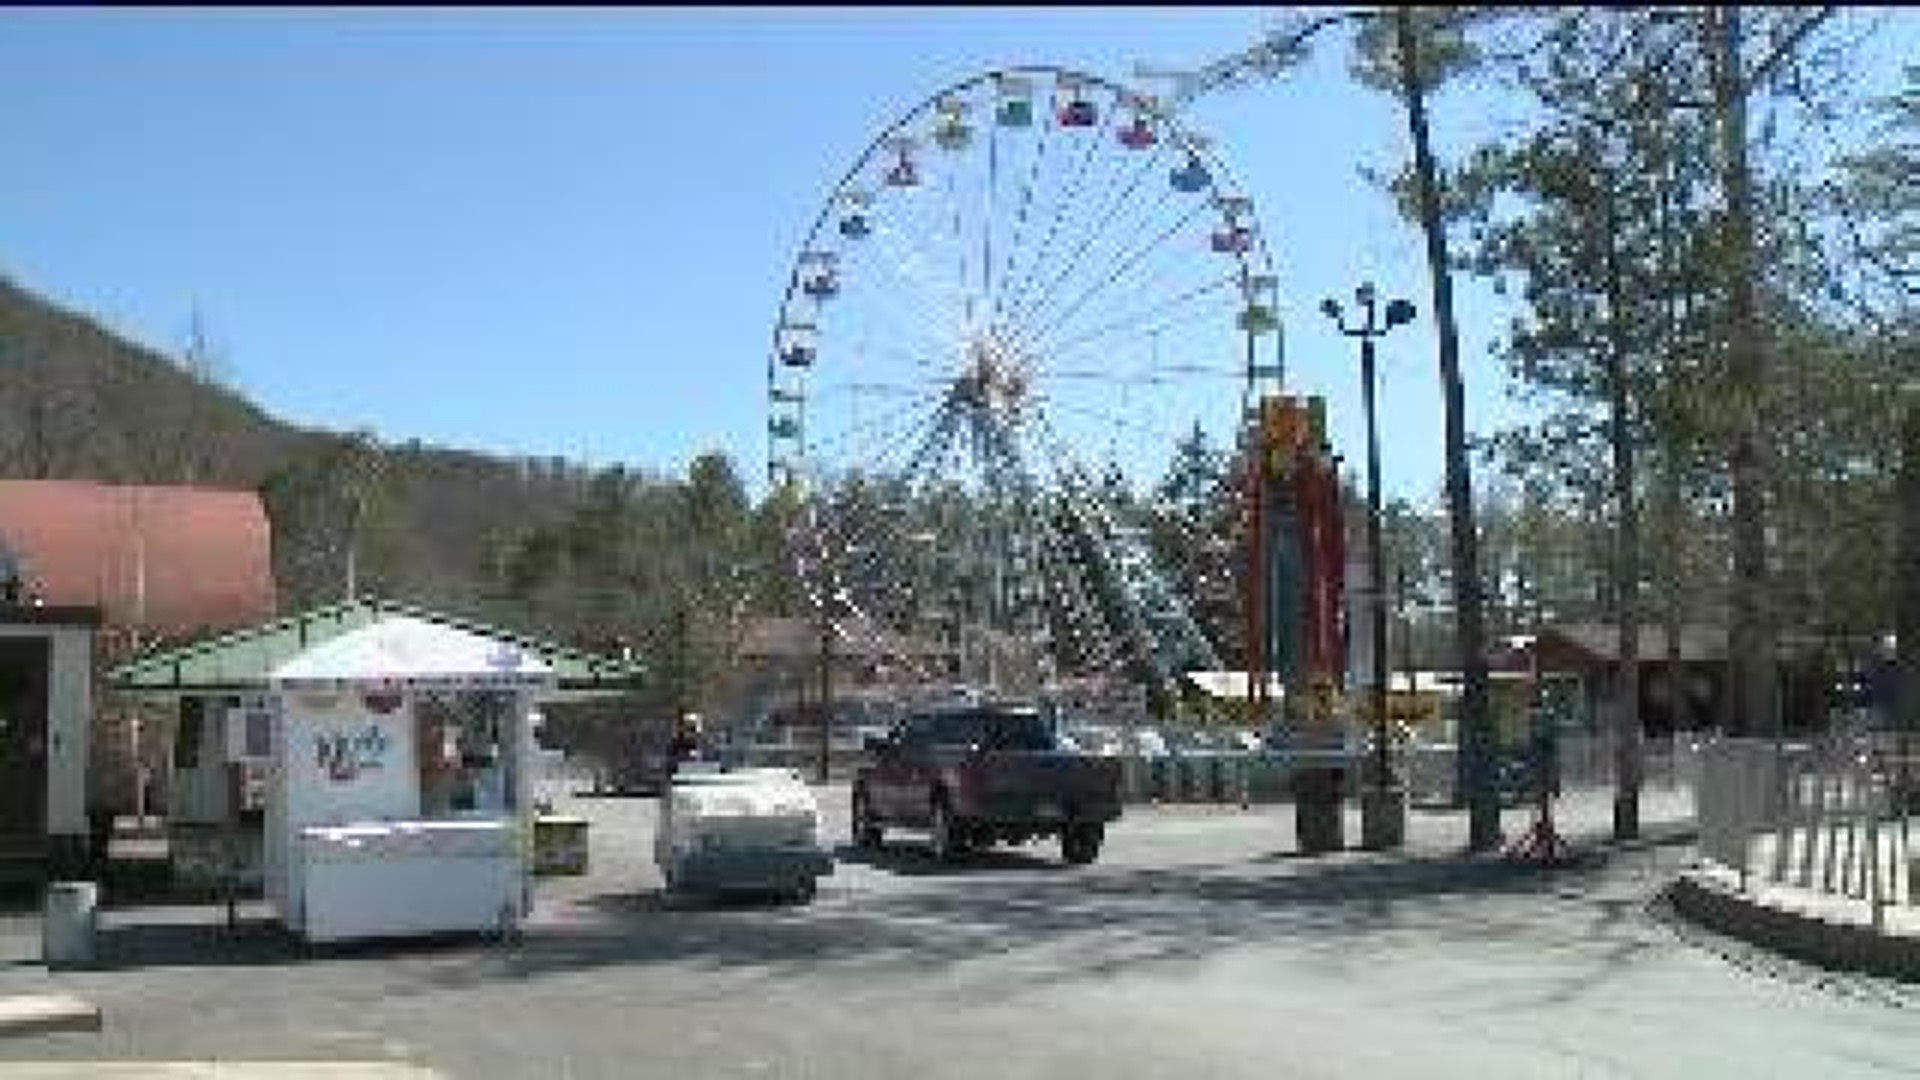 Preparations For Opening Weekend At Knoebels